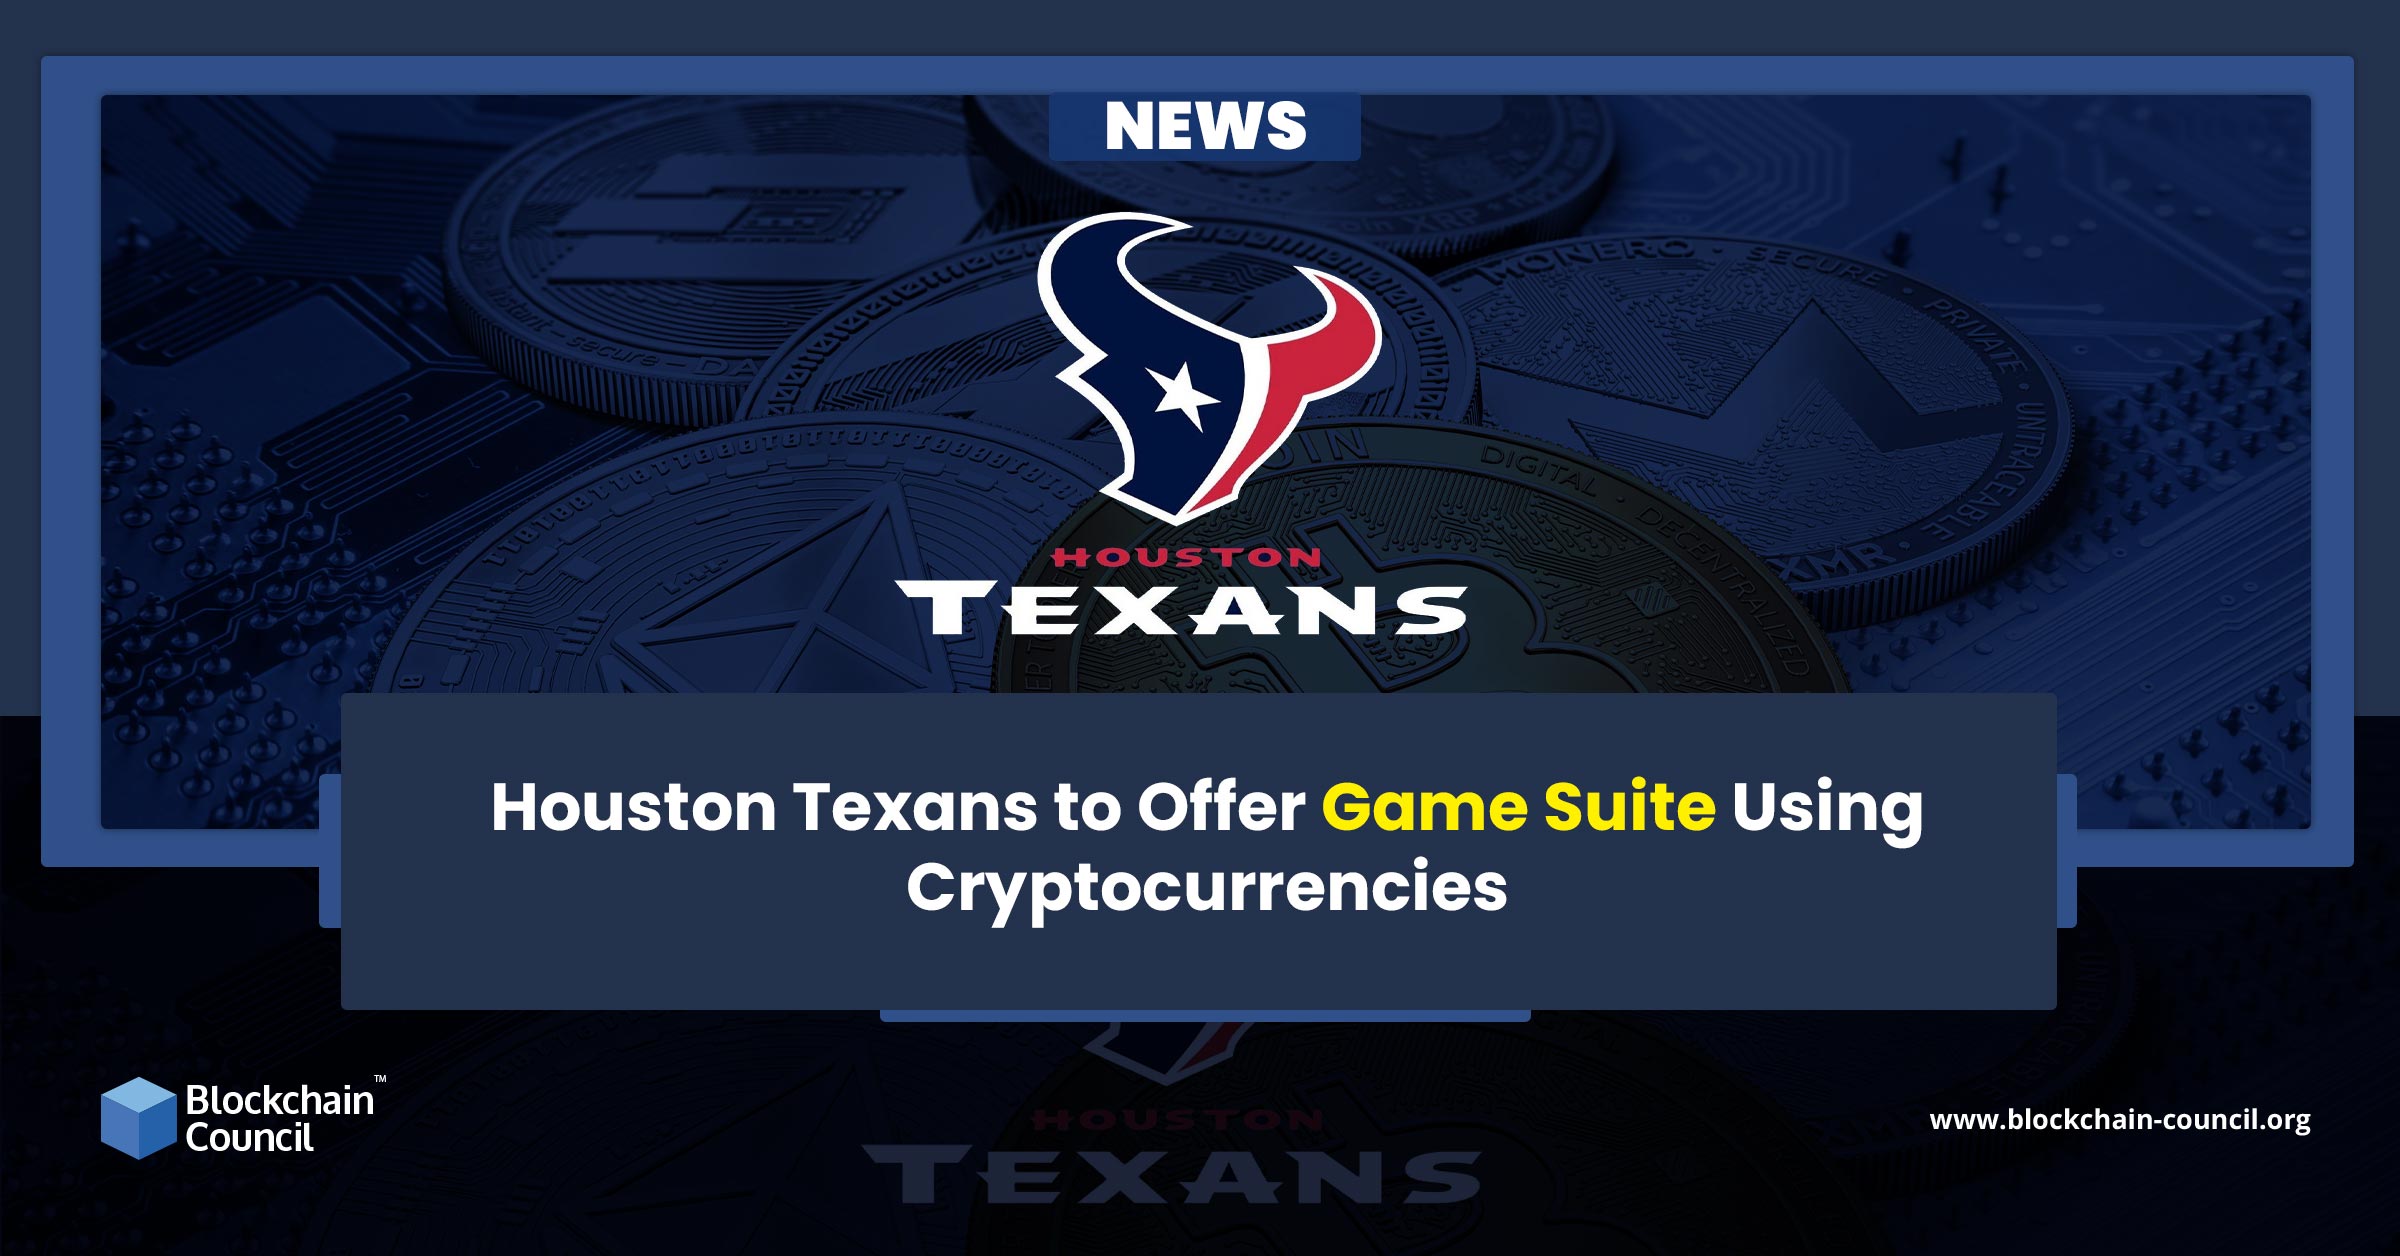 Houston Texans to Offer Game Suite Using Cryptocurrencies